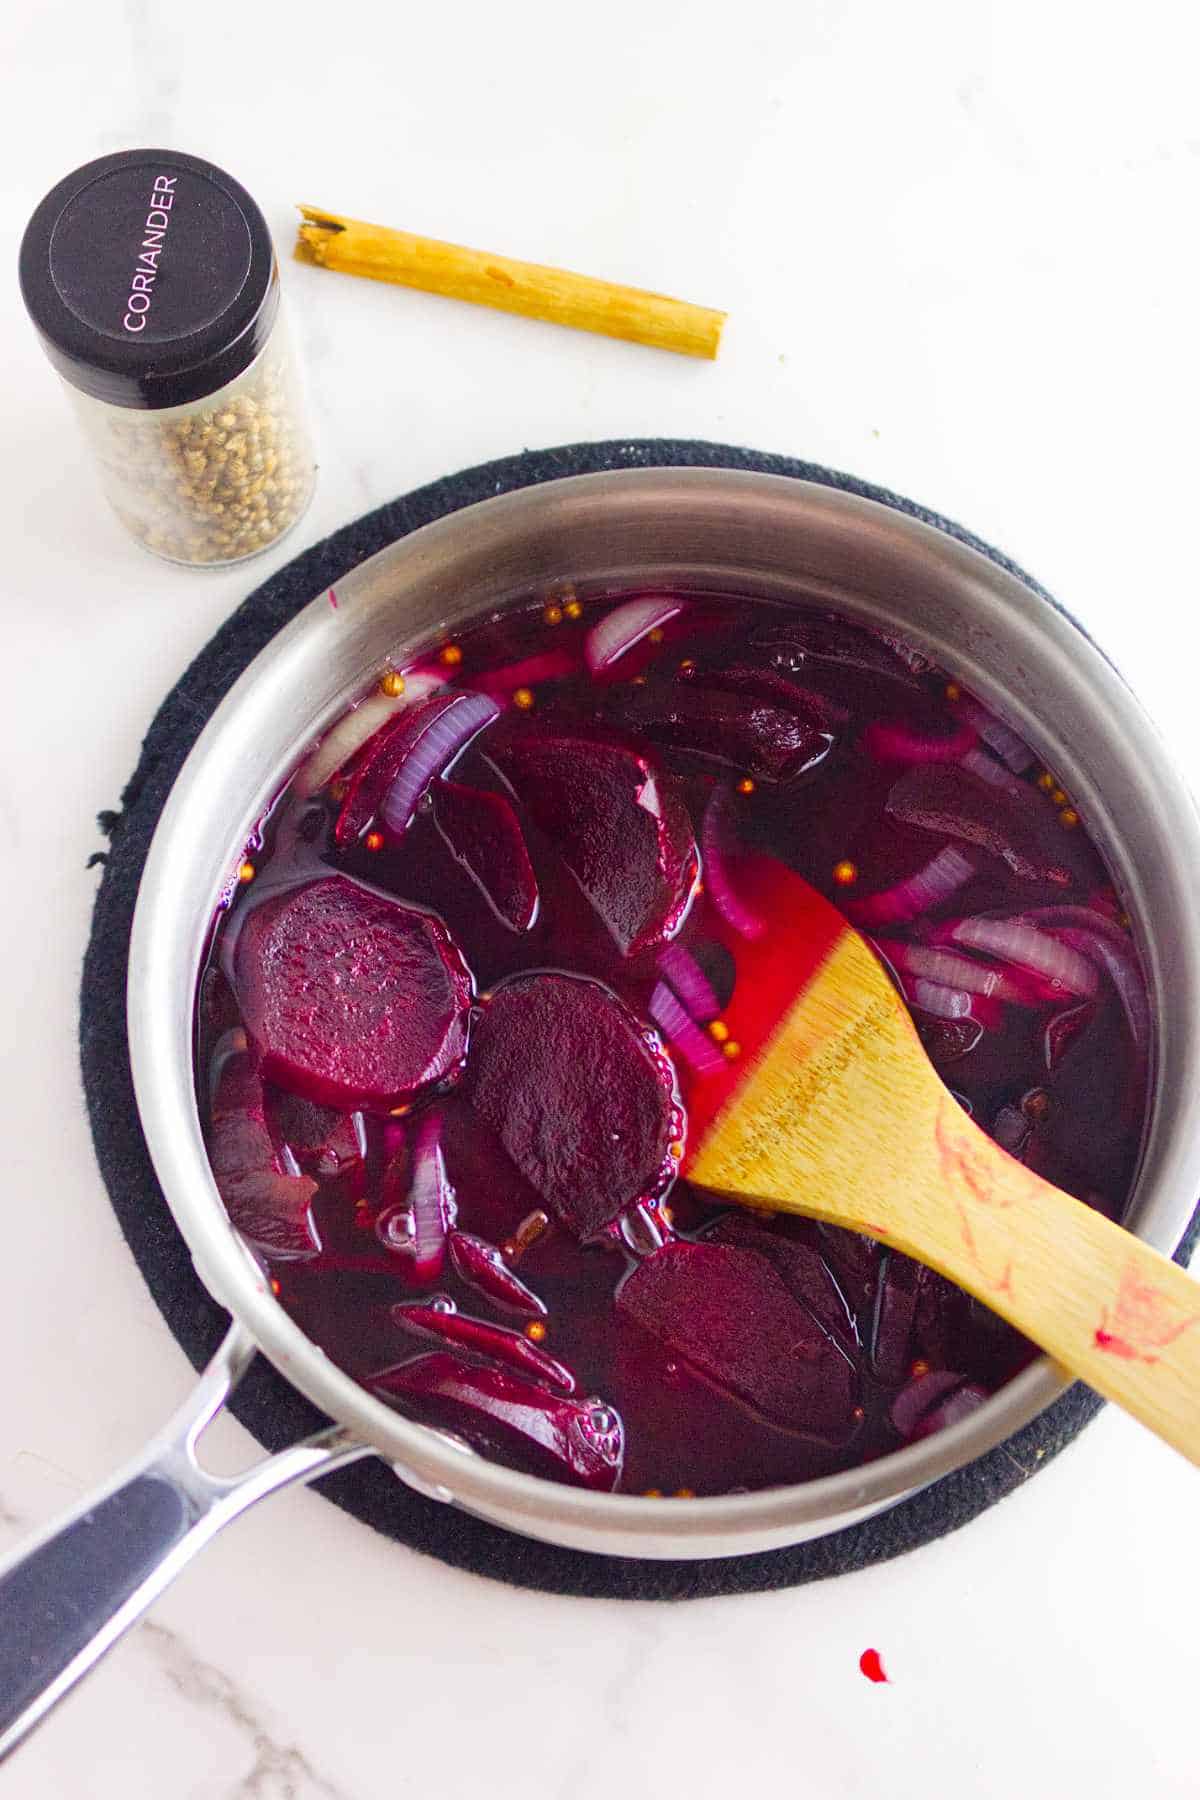 simmered beetroot, onions, and spices in a sweet vinegar brine.